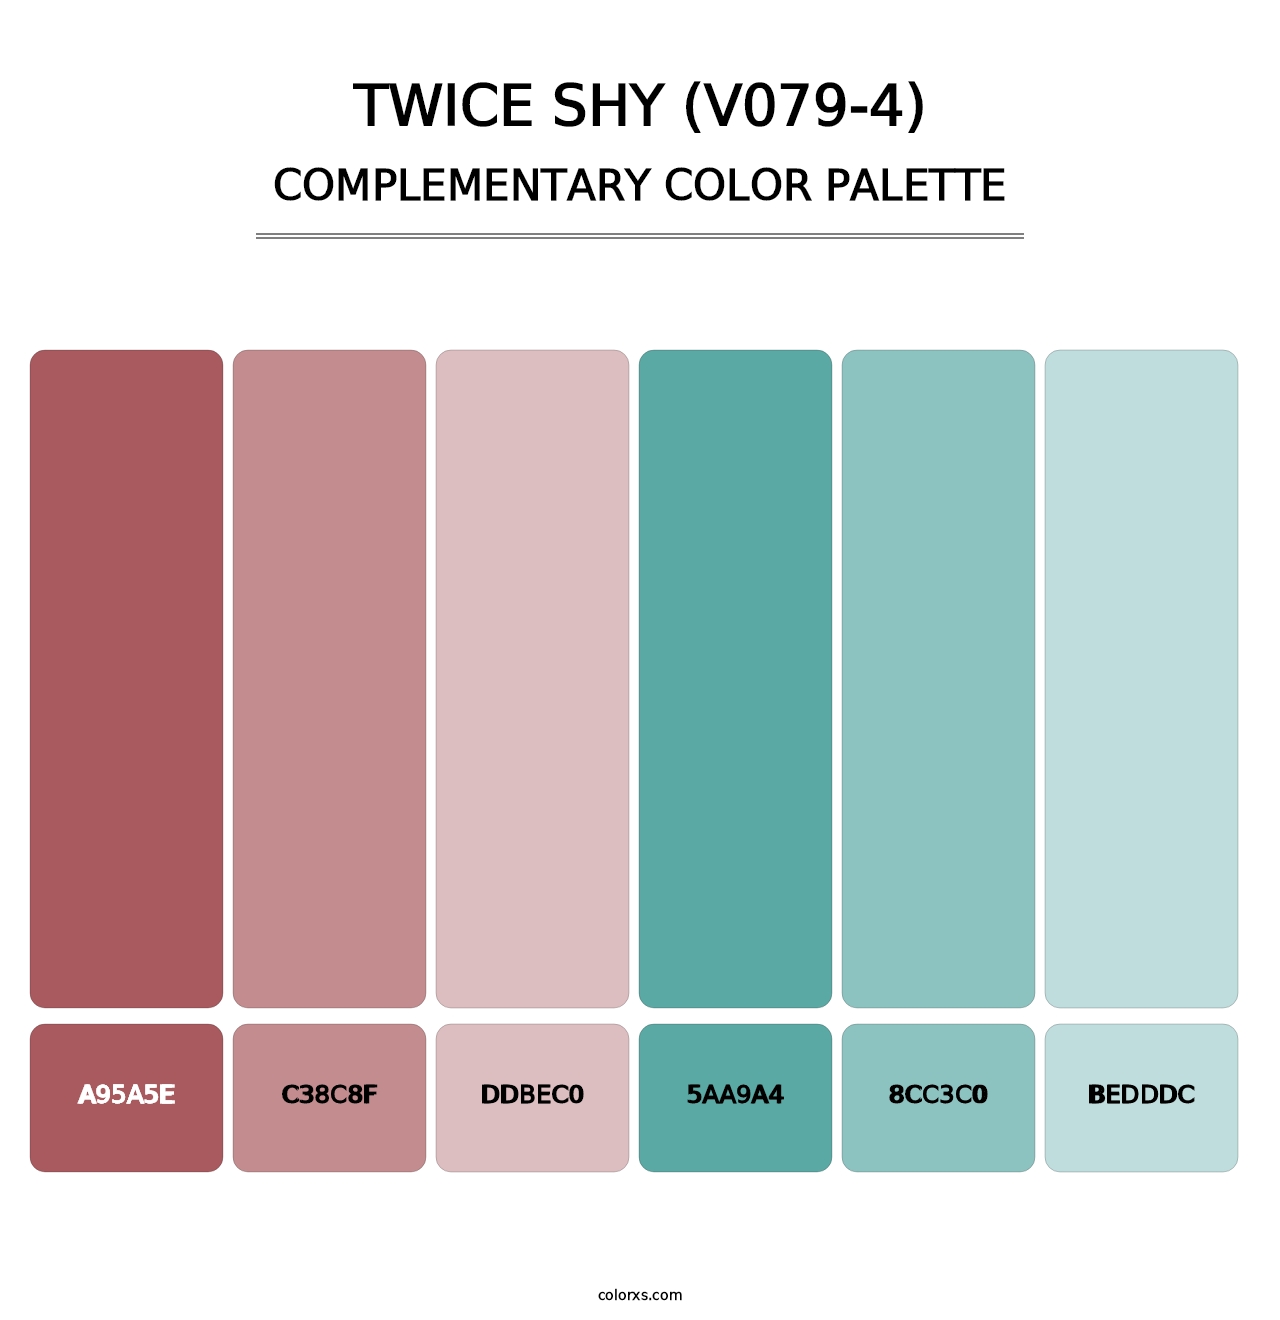 Twice Shy (V079-4) - Complementary Color Palette